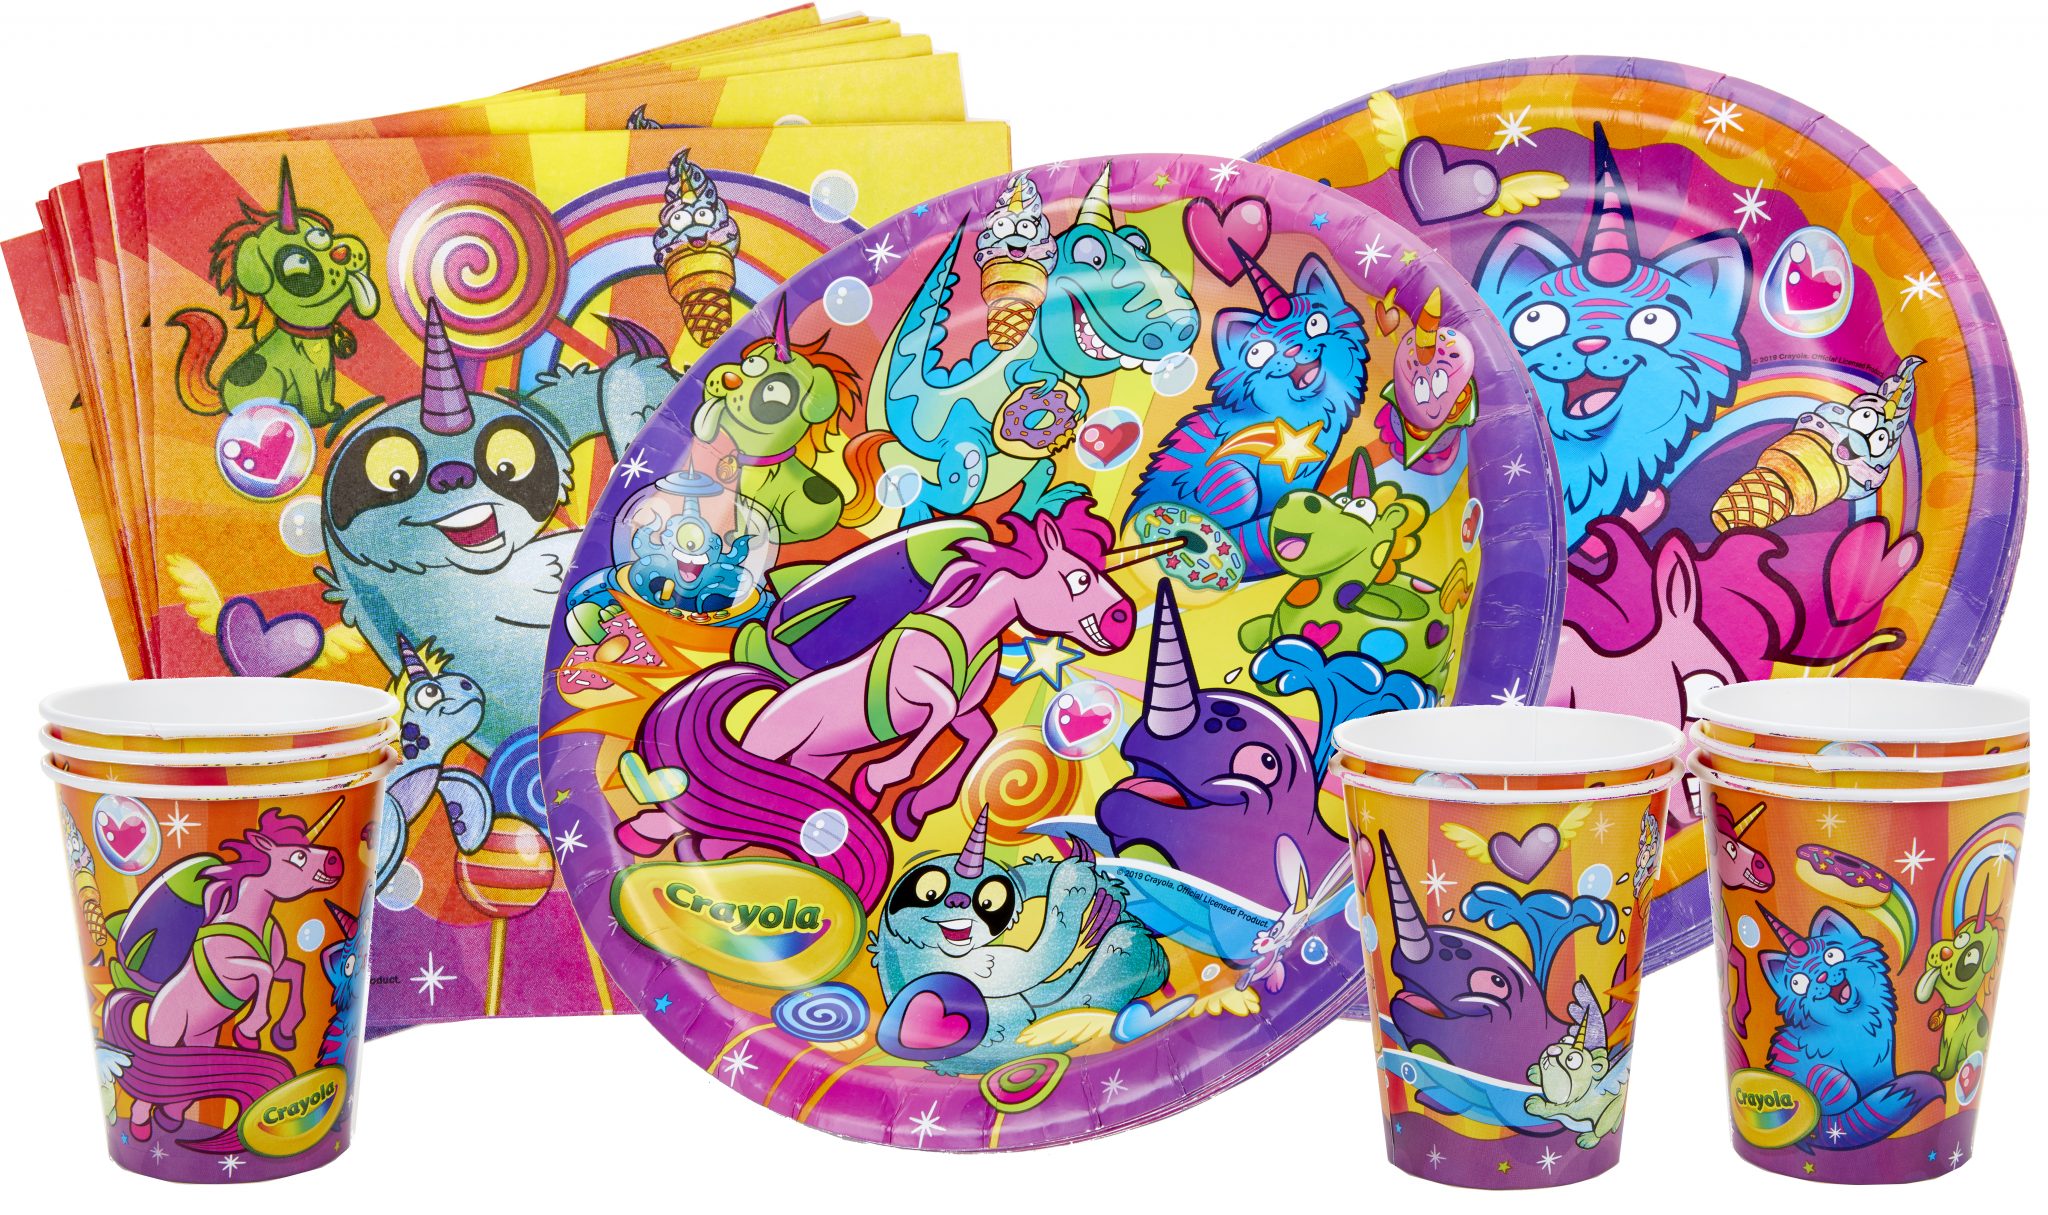 Rubie’s Launches Crayola Costumes, Party Goods image